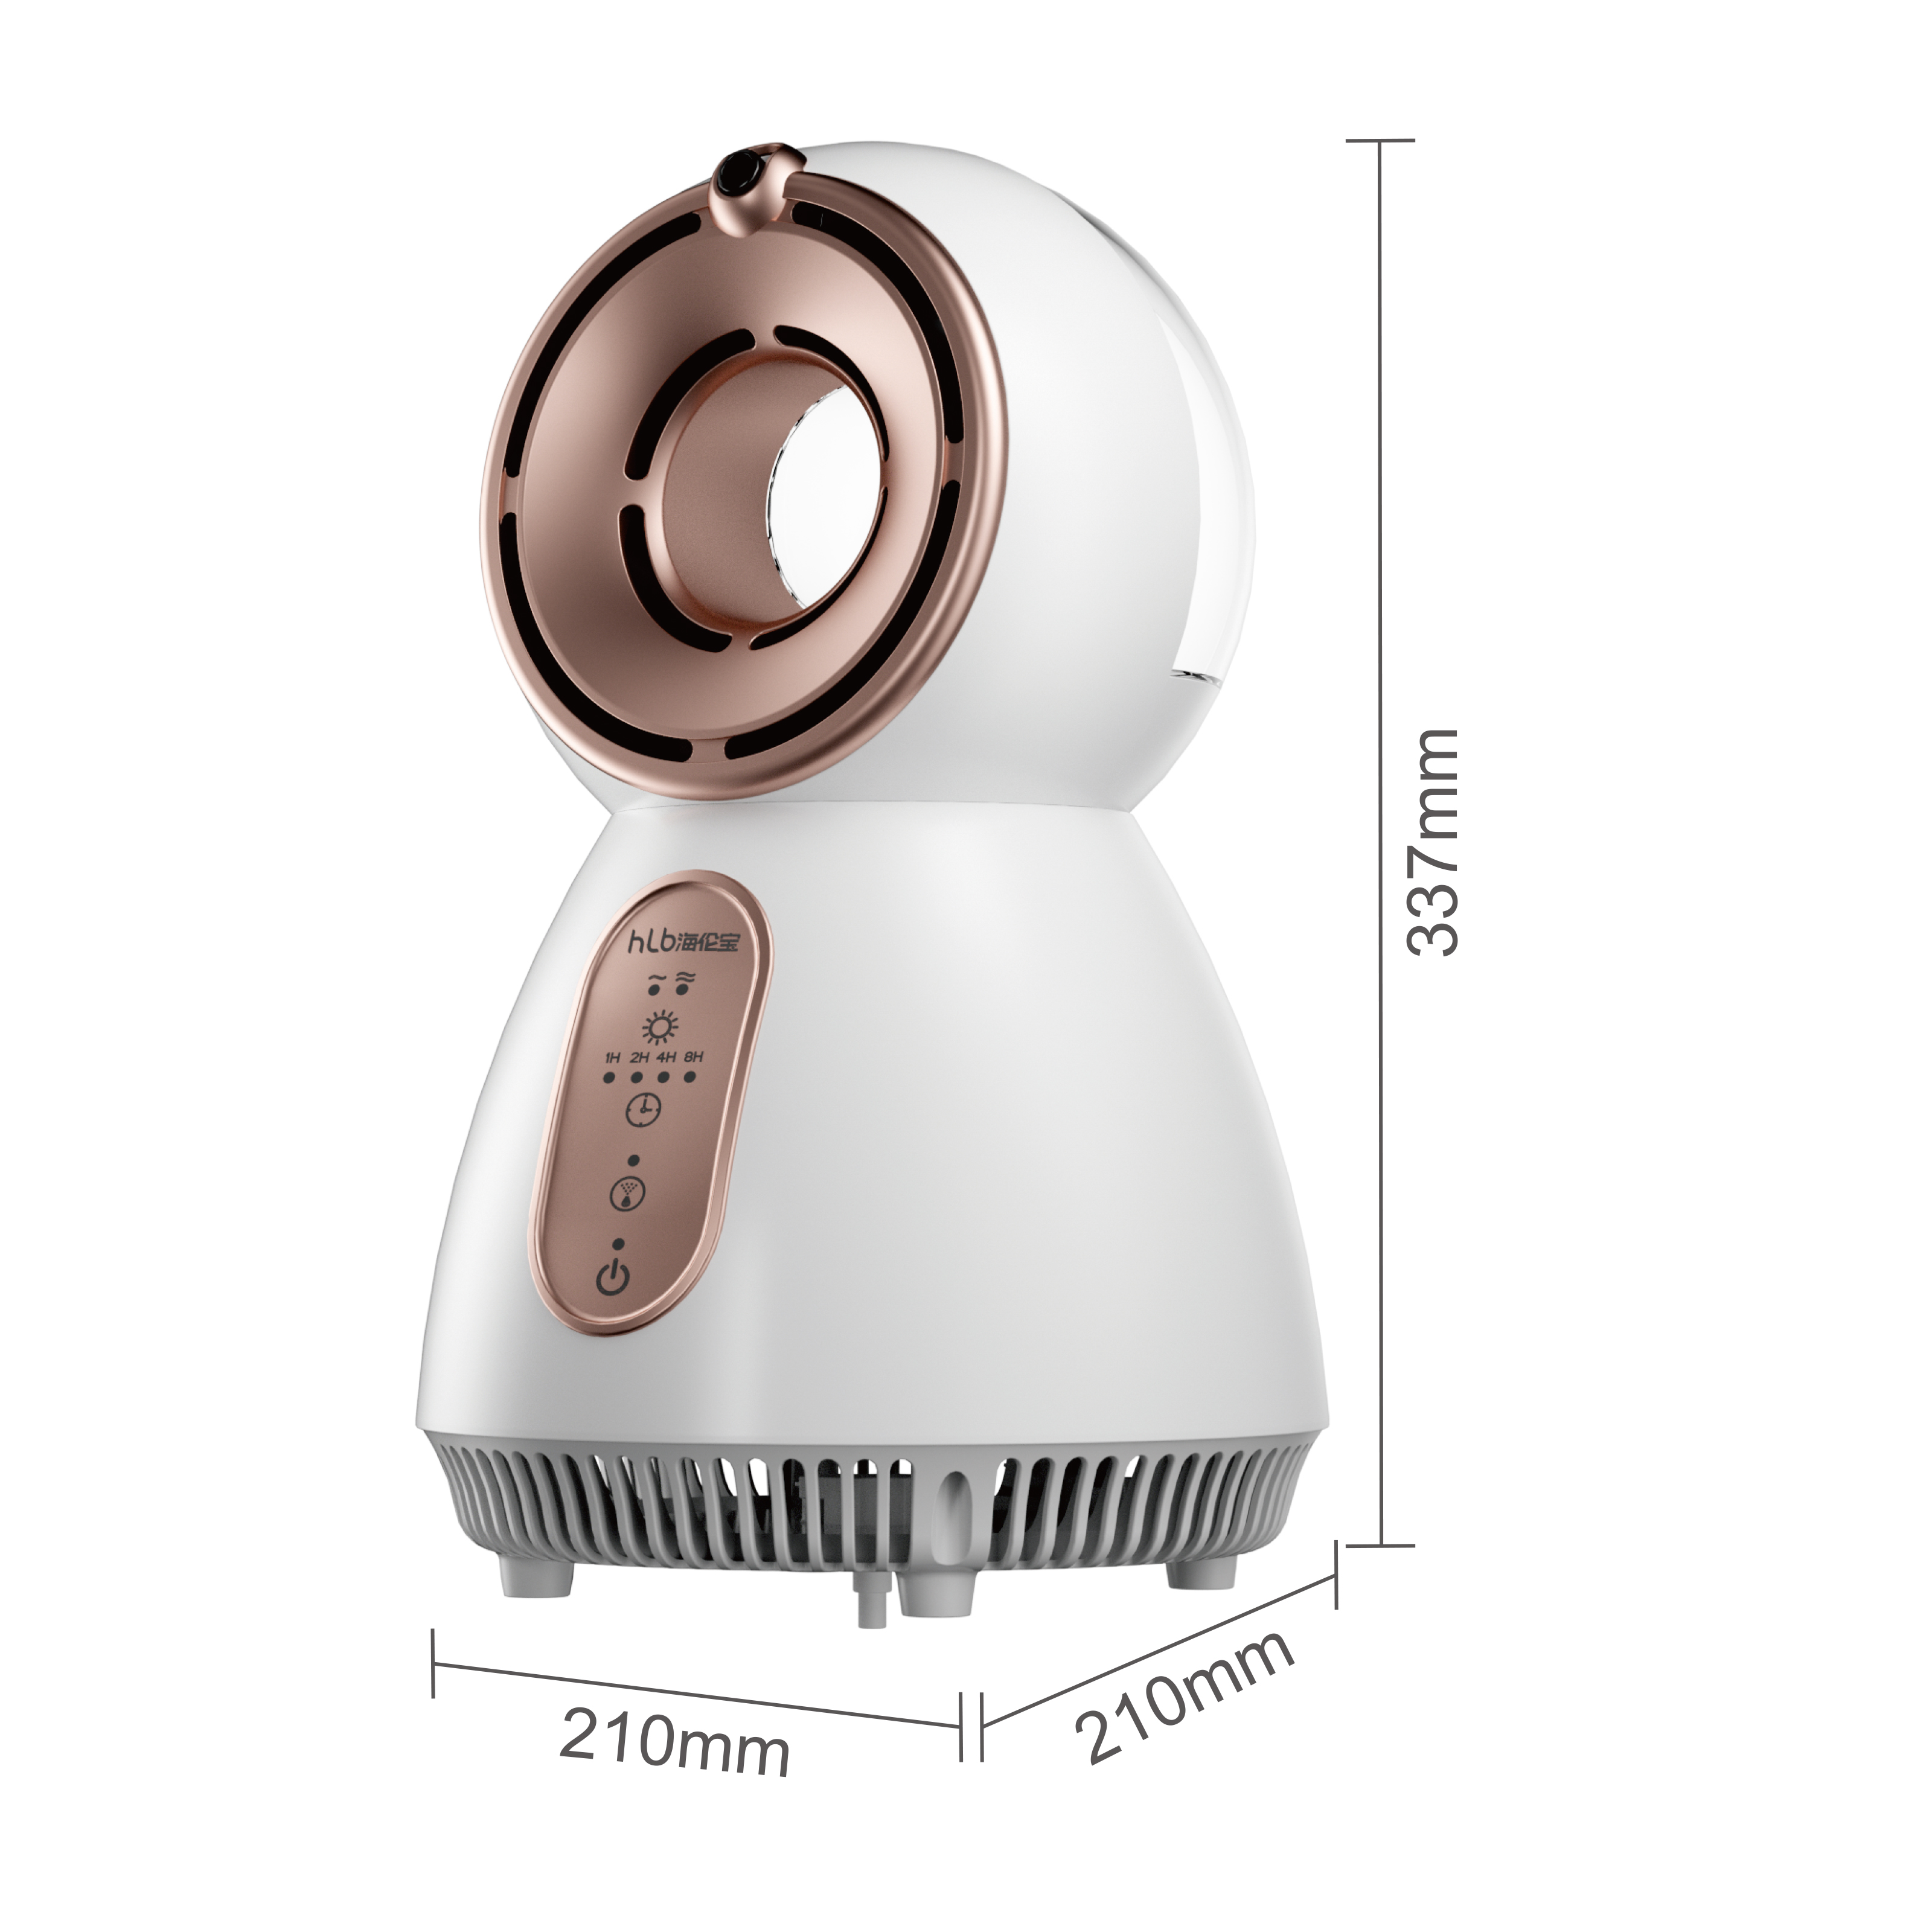 New Trend 1000W Pure Copper Motor Humidity Portable Evaporative Air Heater Appliance